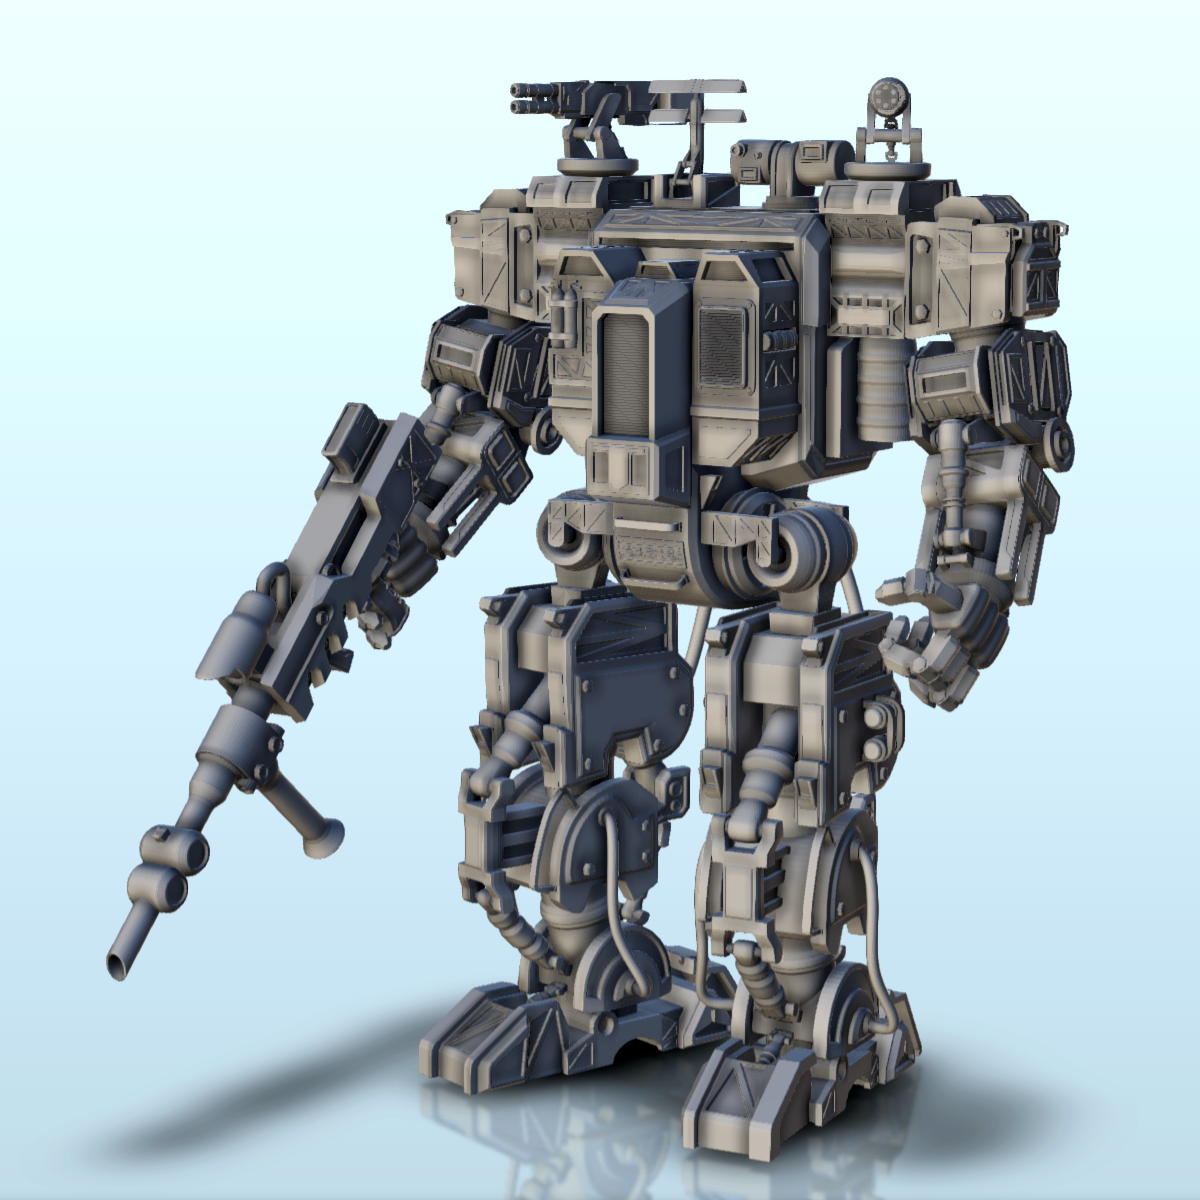 robot futuristic soldier in combat 3D render science fiction